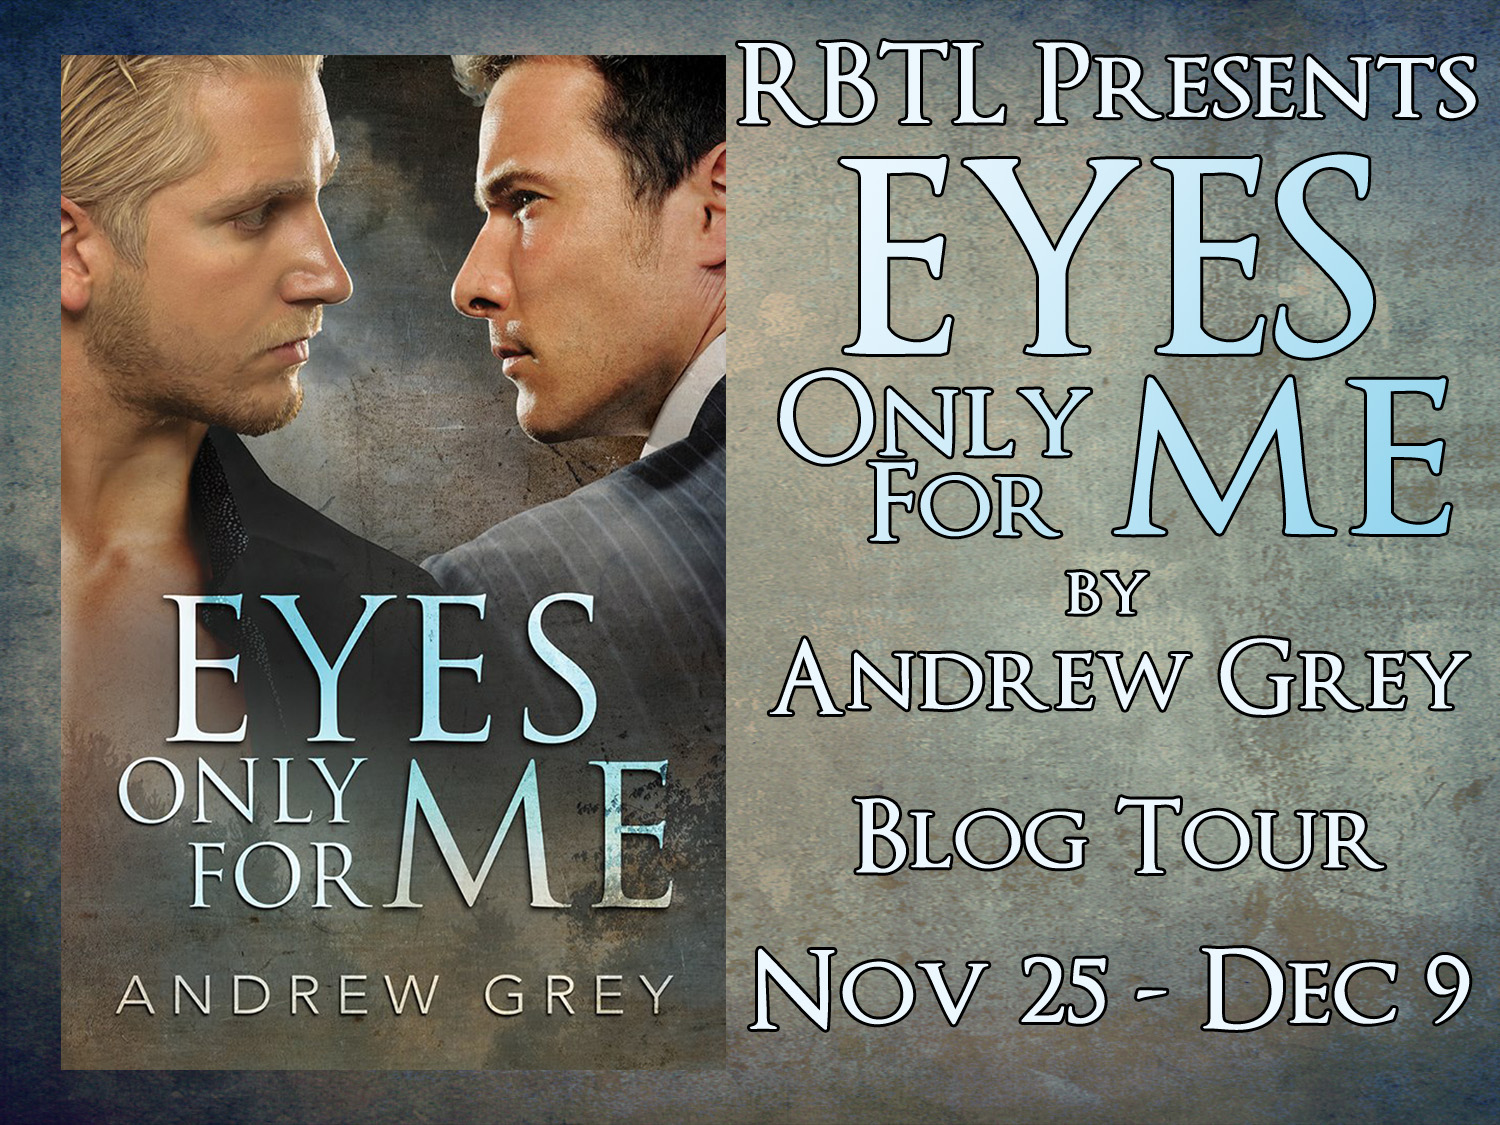 andrew grey eyes only for me torrent